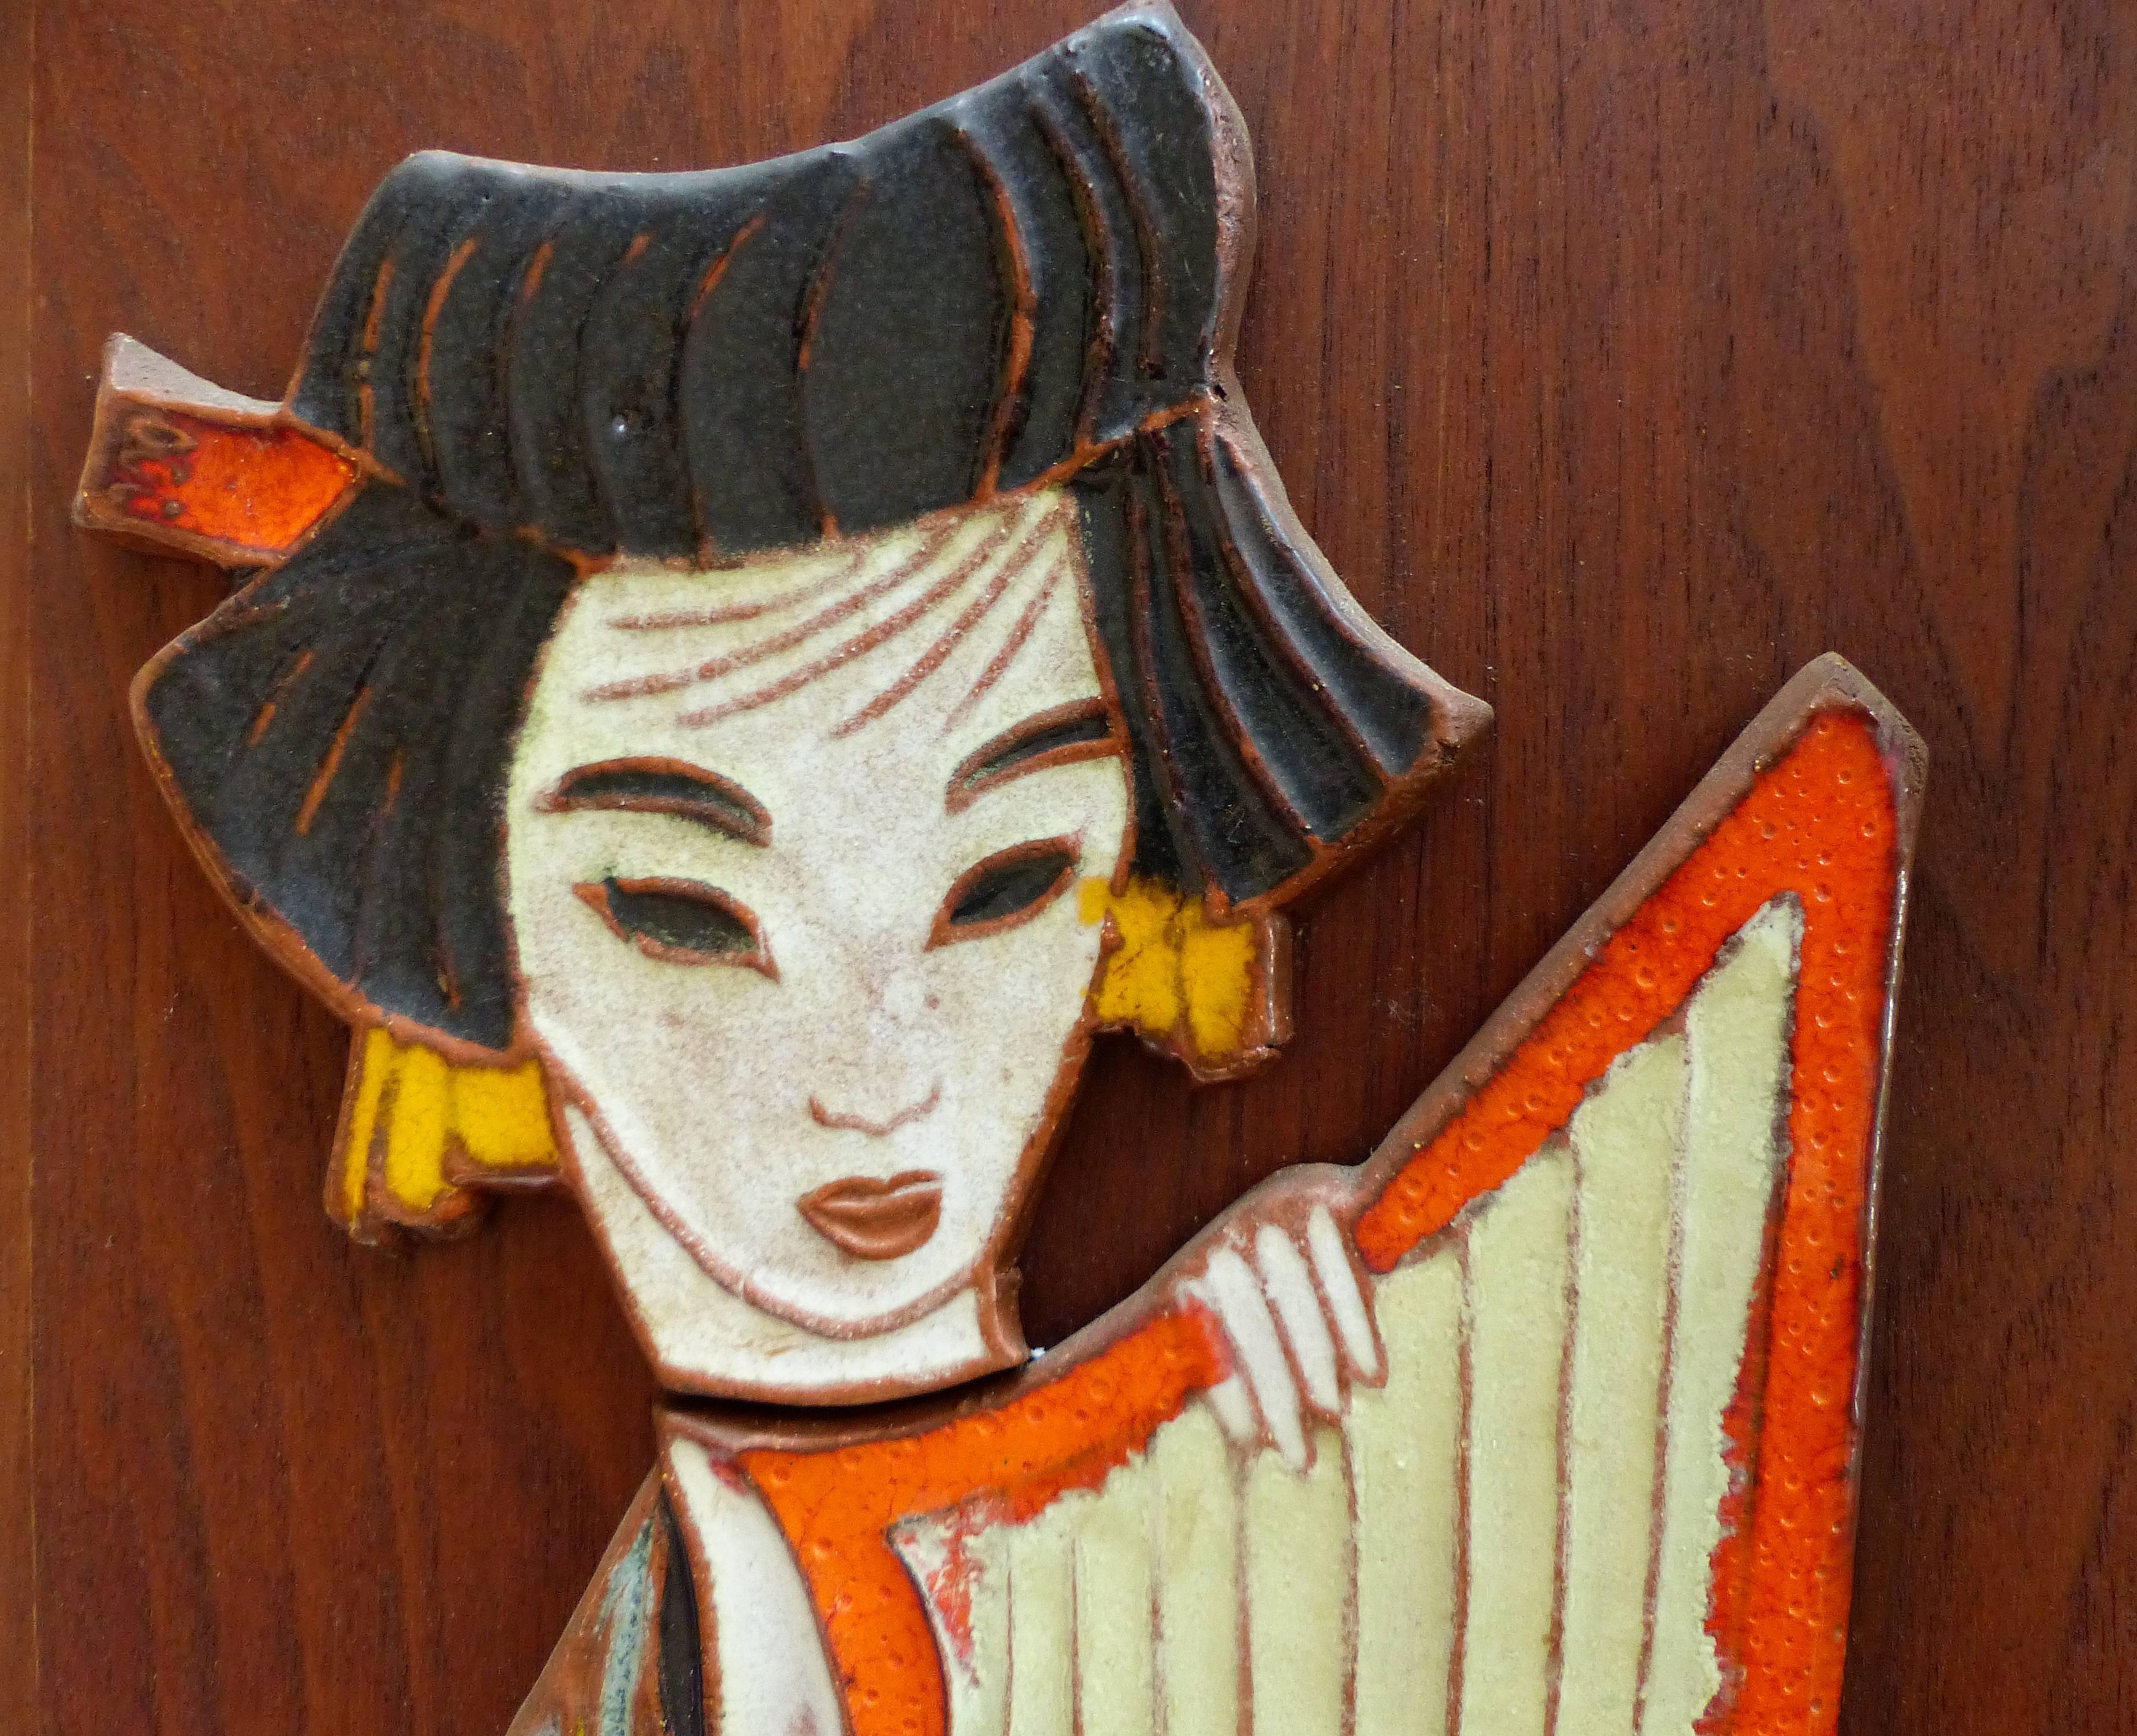 A pair of Mid-Century Modern glazed ceramic wall plaques with a geisha theme by the noted Mid-Century ceramicist Harris Strong. Plaques have hangers provided. The plaques no longer retain the original maker's label but are well know as Strong’s.